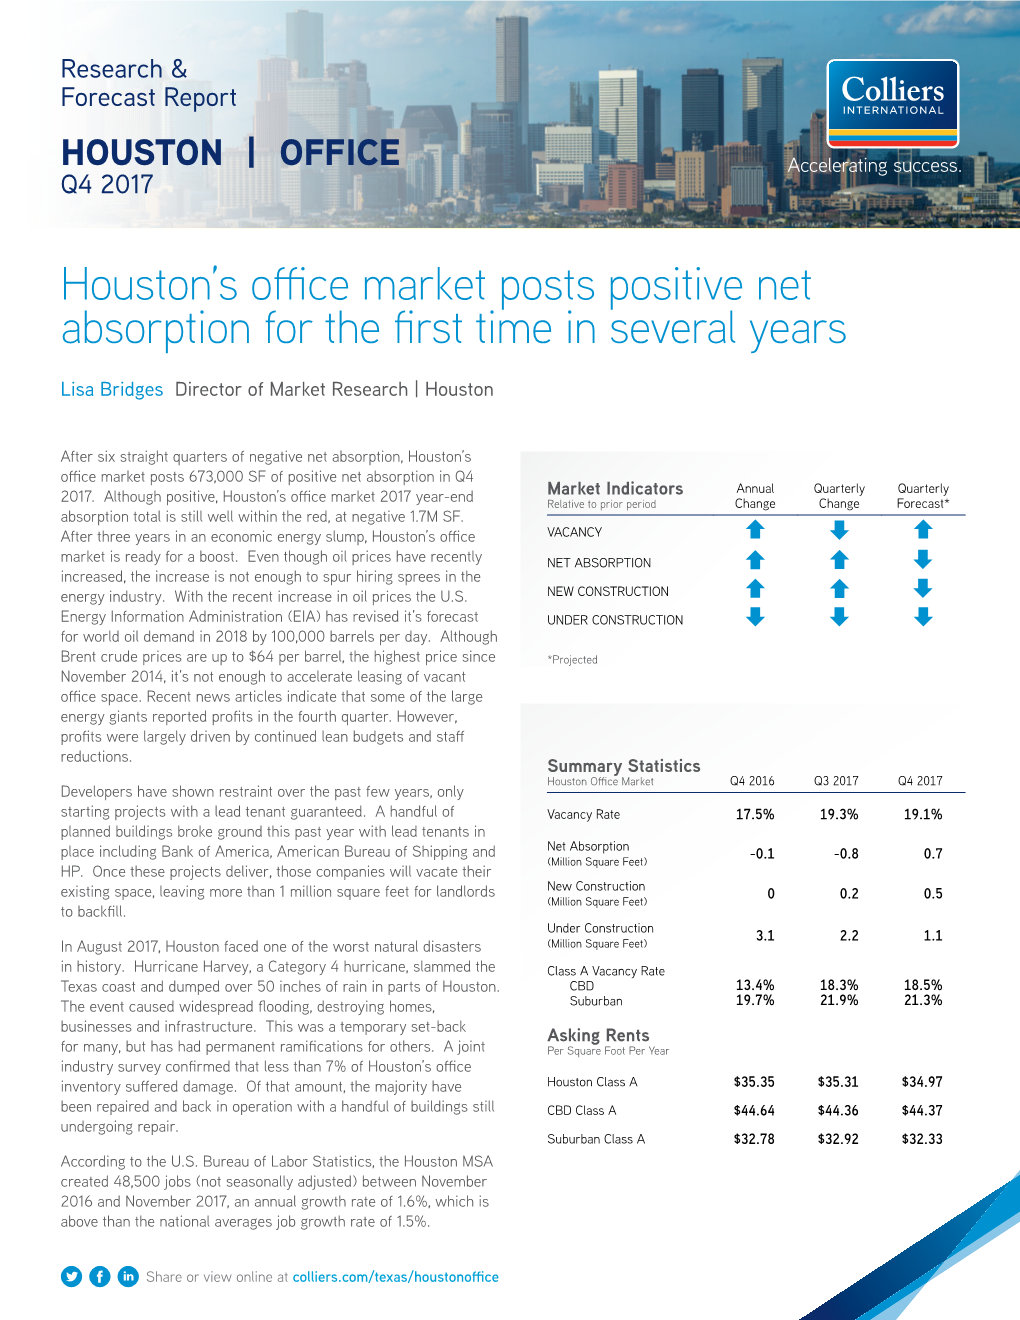 Houston's Office Market Posts Positive Net Absorption for the First Time In